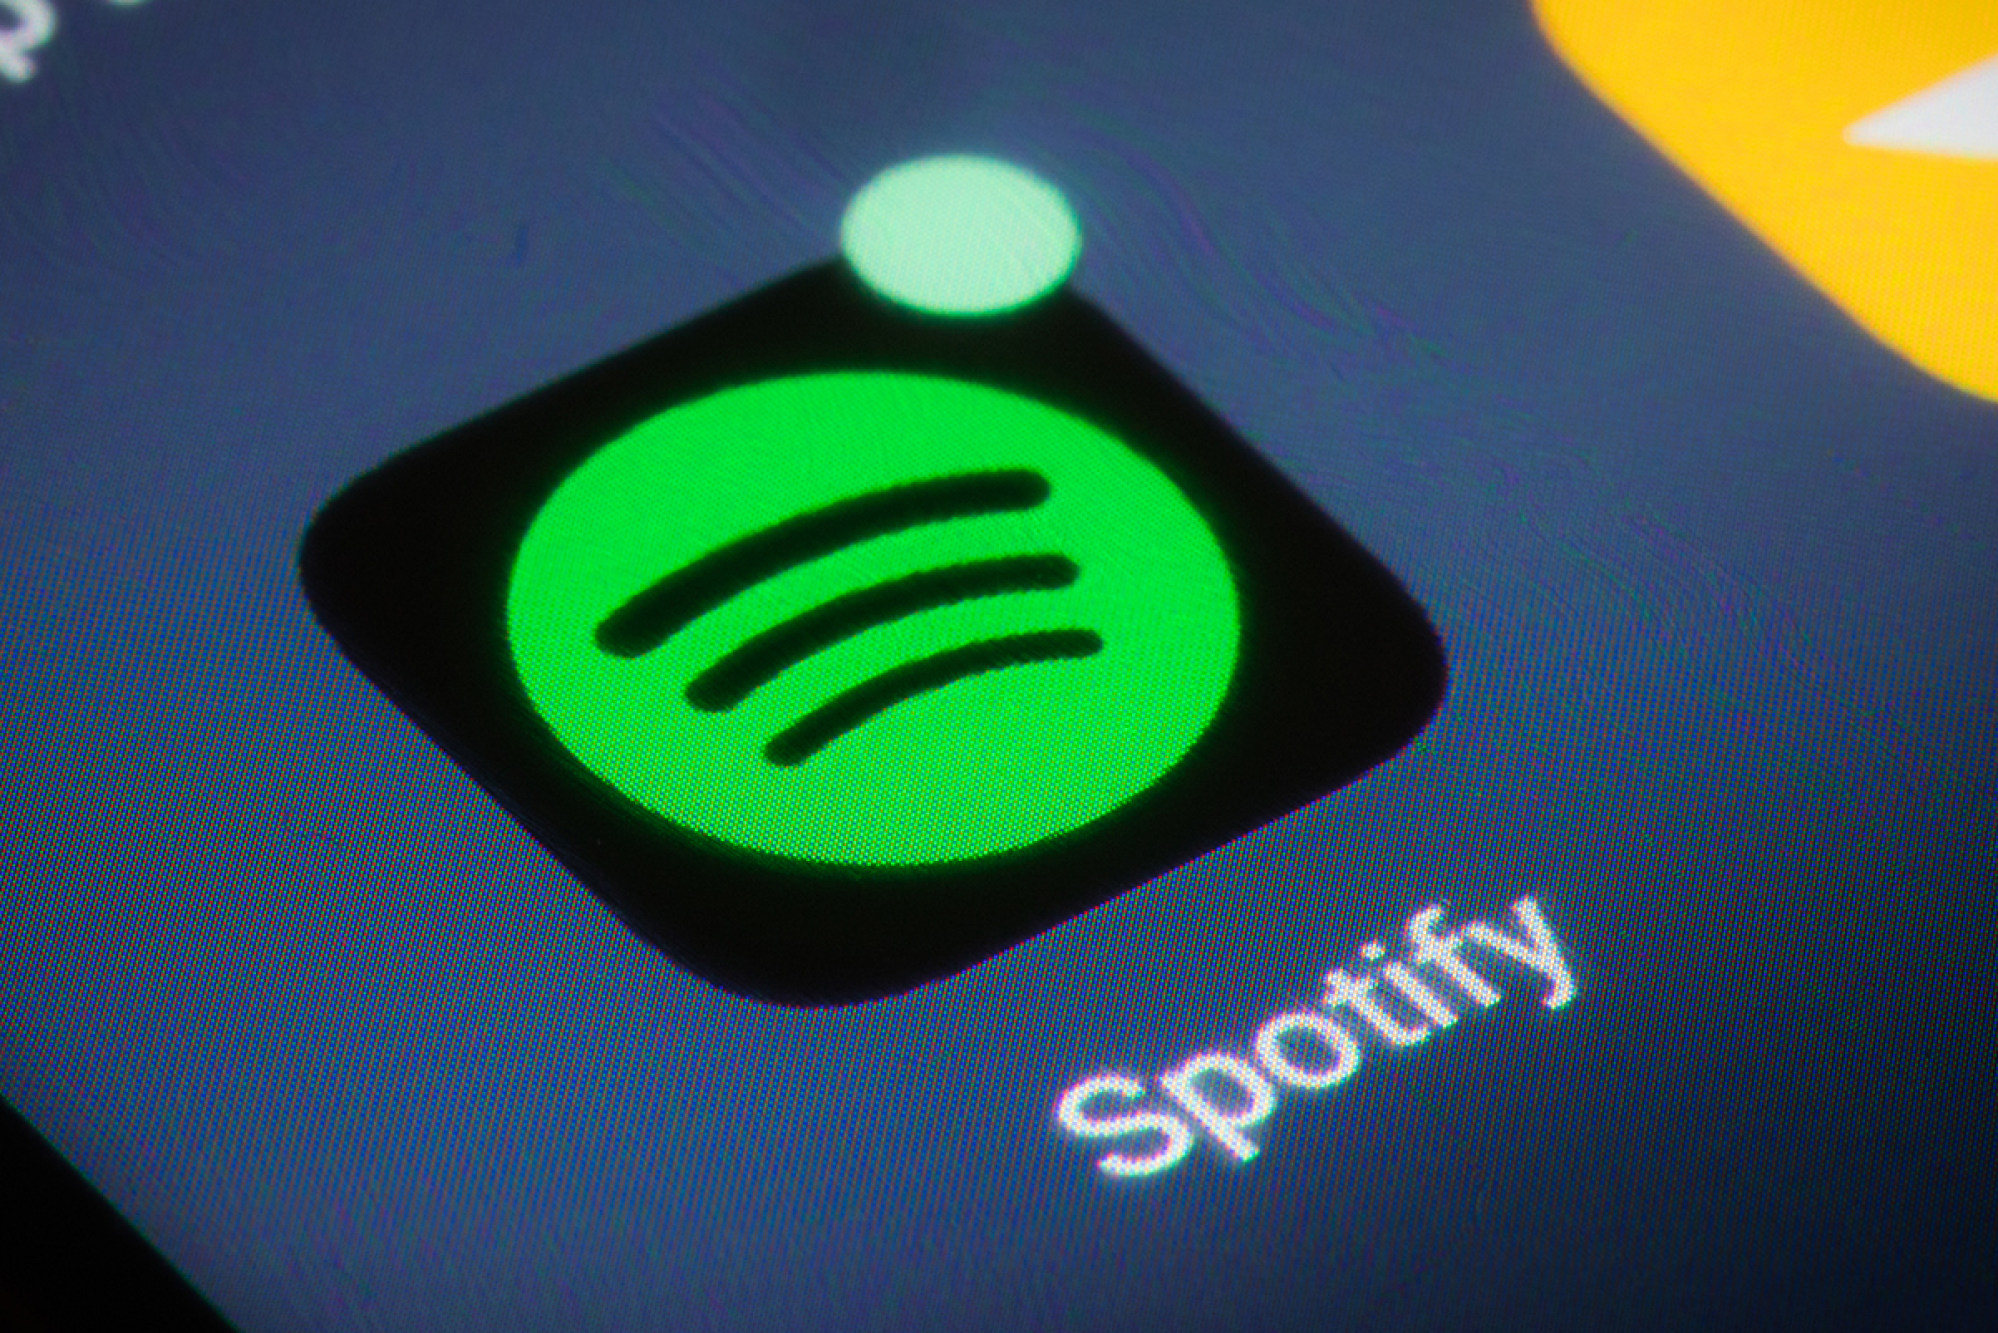 The authorities are believed to have taken issue with a playlist Fahmi curated and uploaded to the music streaming platform Spotify. Photo: Dreamstime/TNS